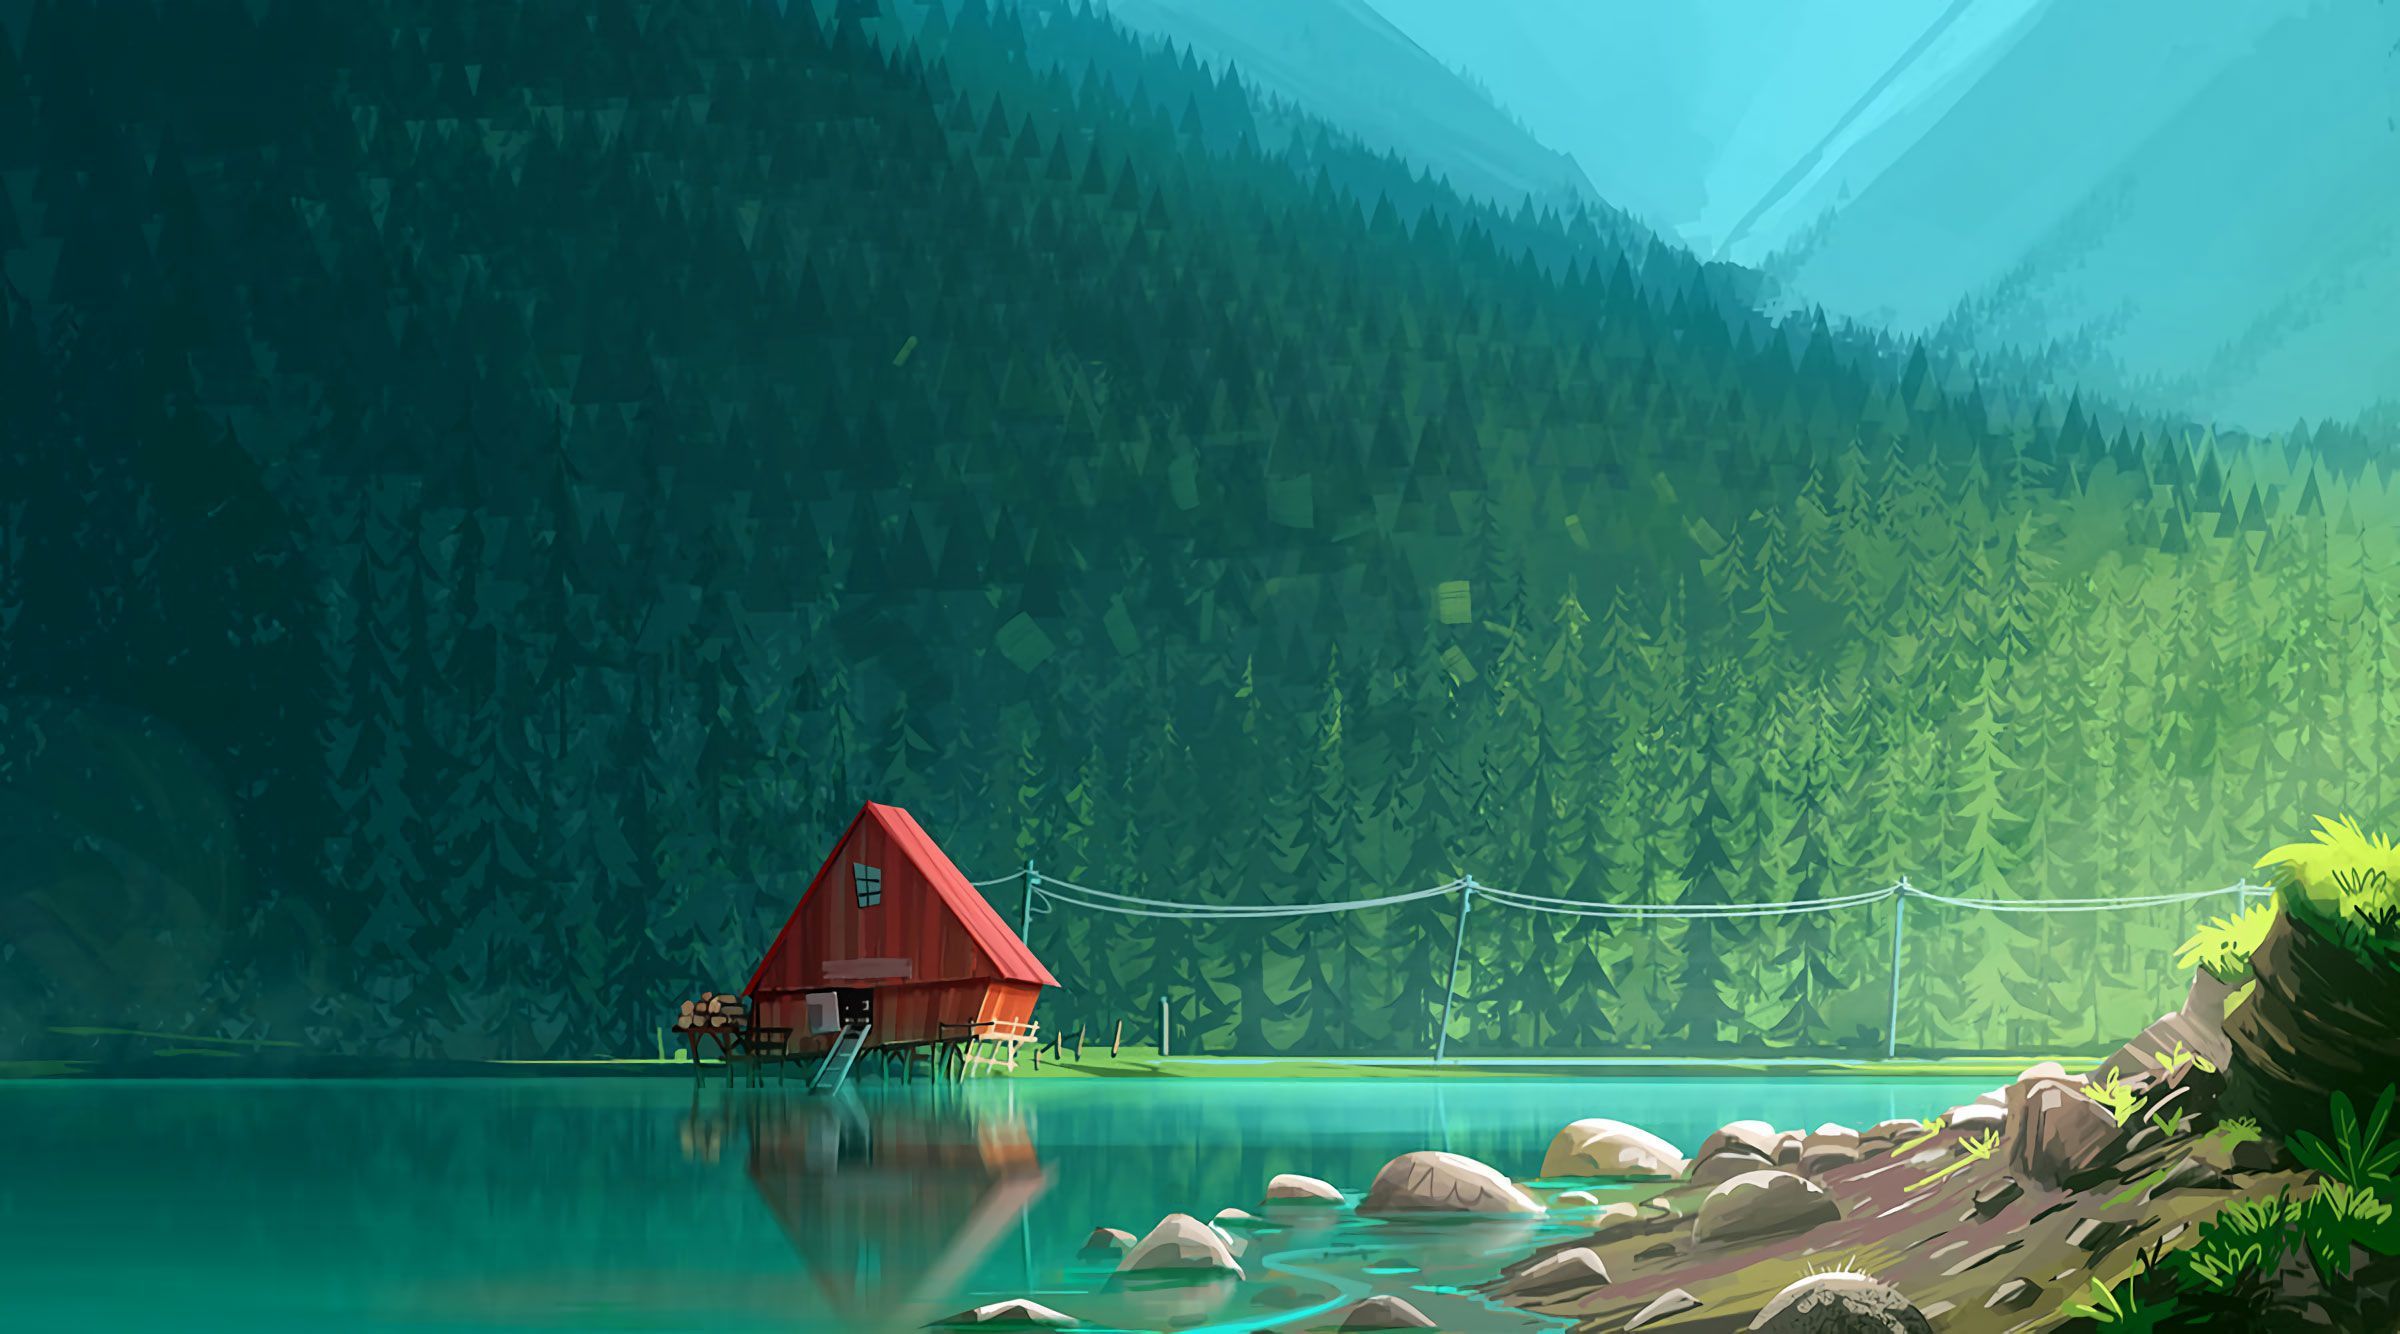 A painting of the mountains and water - Desktop, teal, computer, dark green, lake